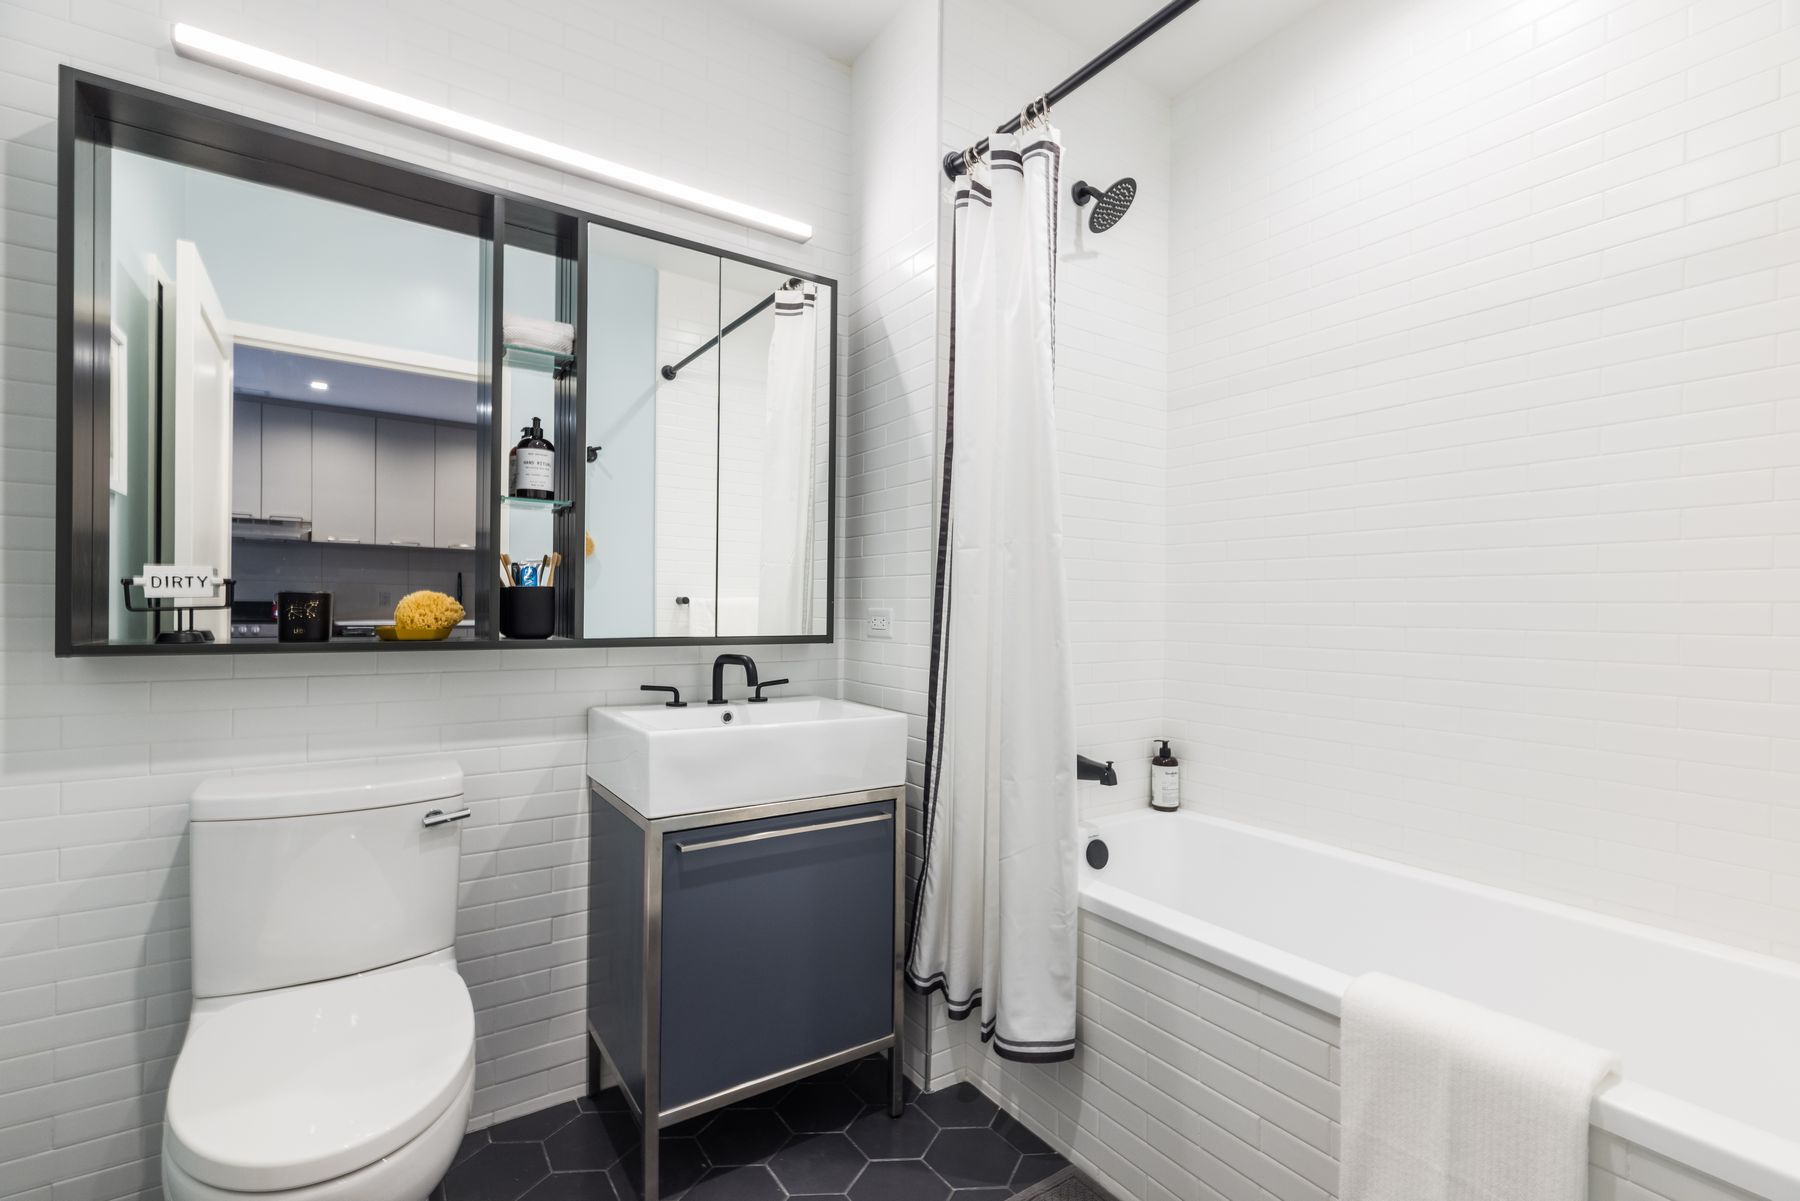 Modern bathroom with fully white tiled tub shower, single vanity with slate blue and silver under sink cabinet, large horizontal glass slider door medicine cabinet above toilet and sink, dark hexagon floor tiles